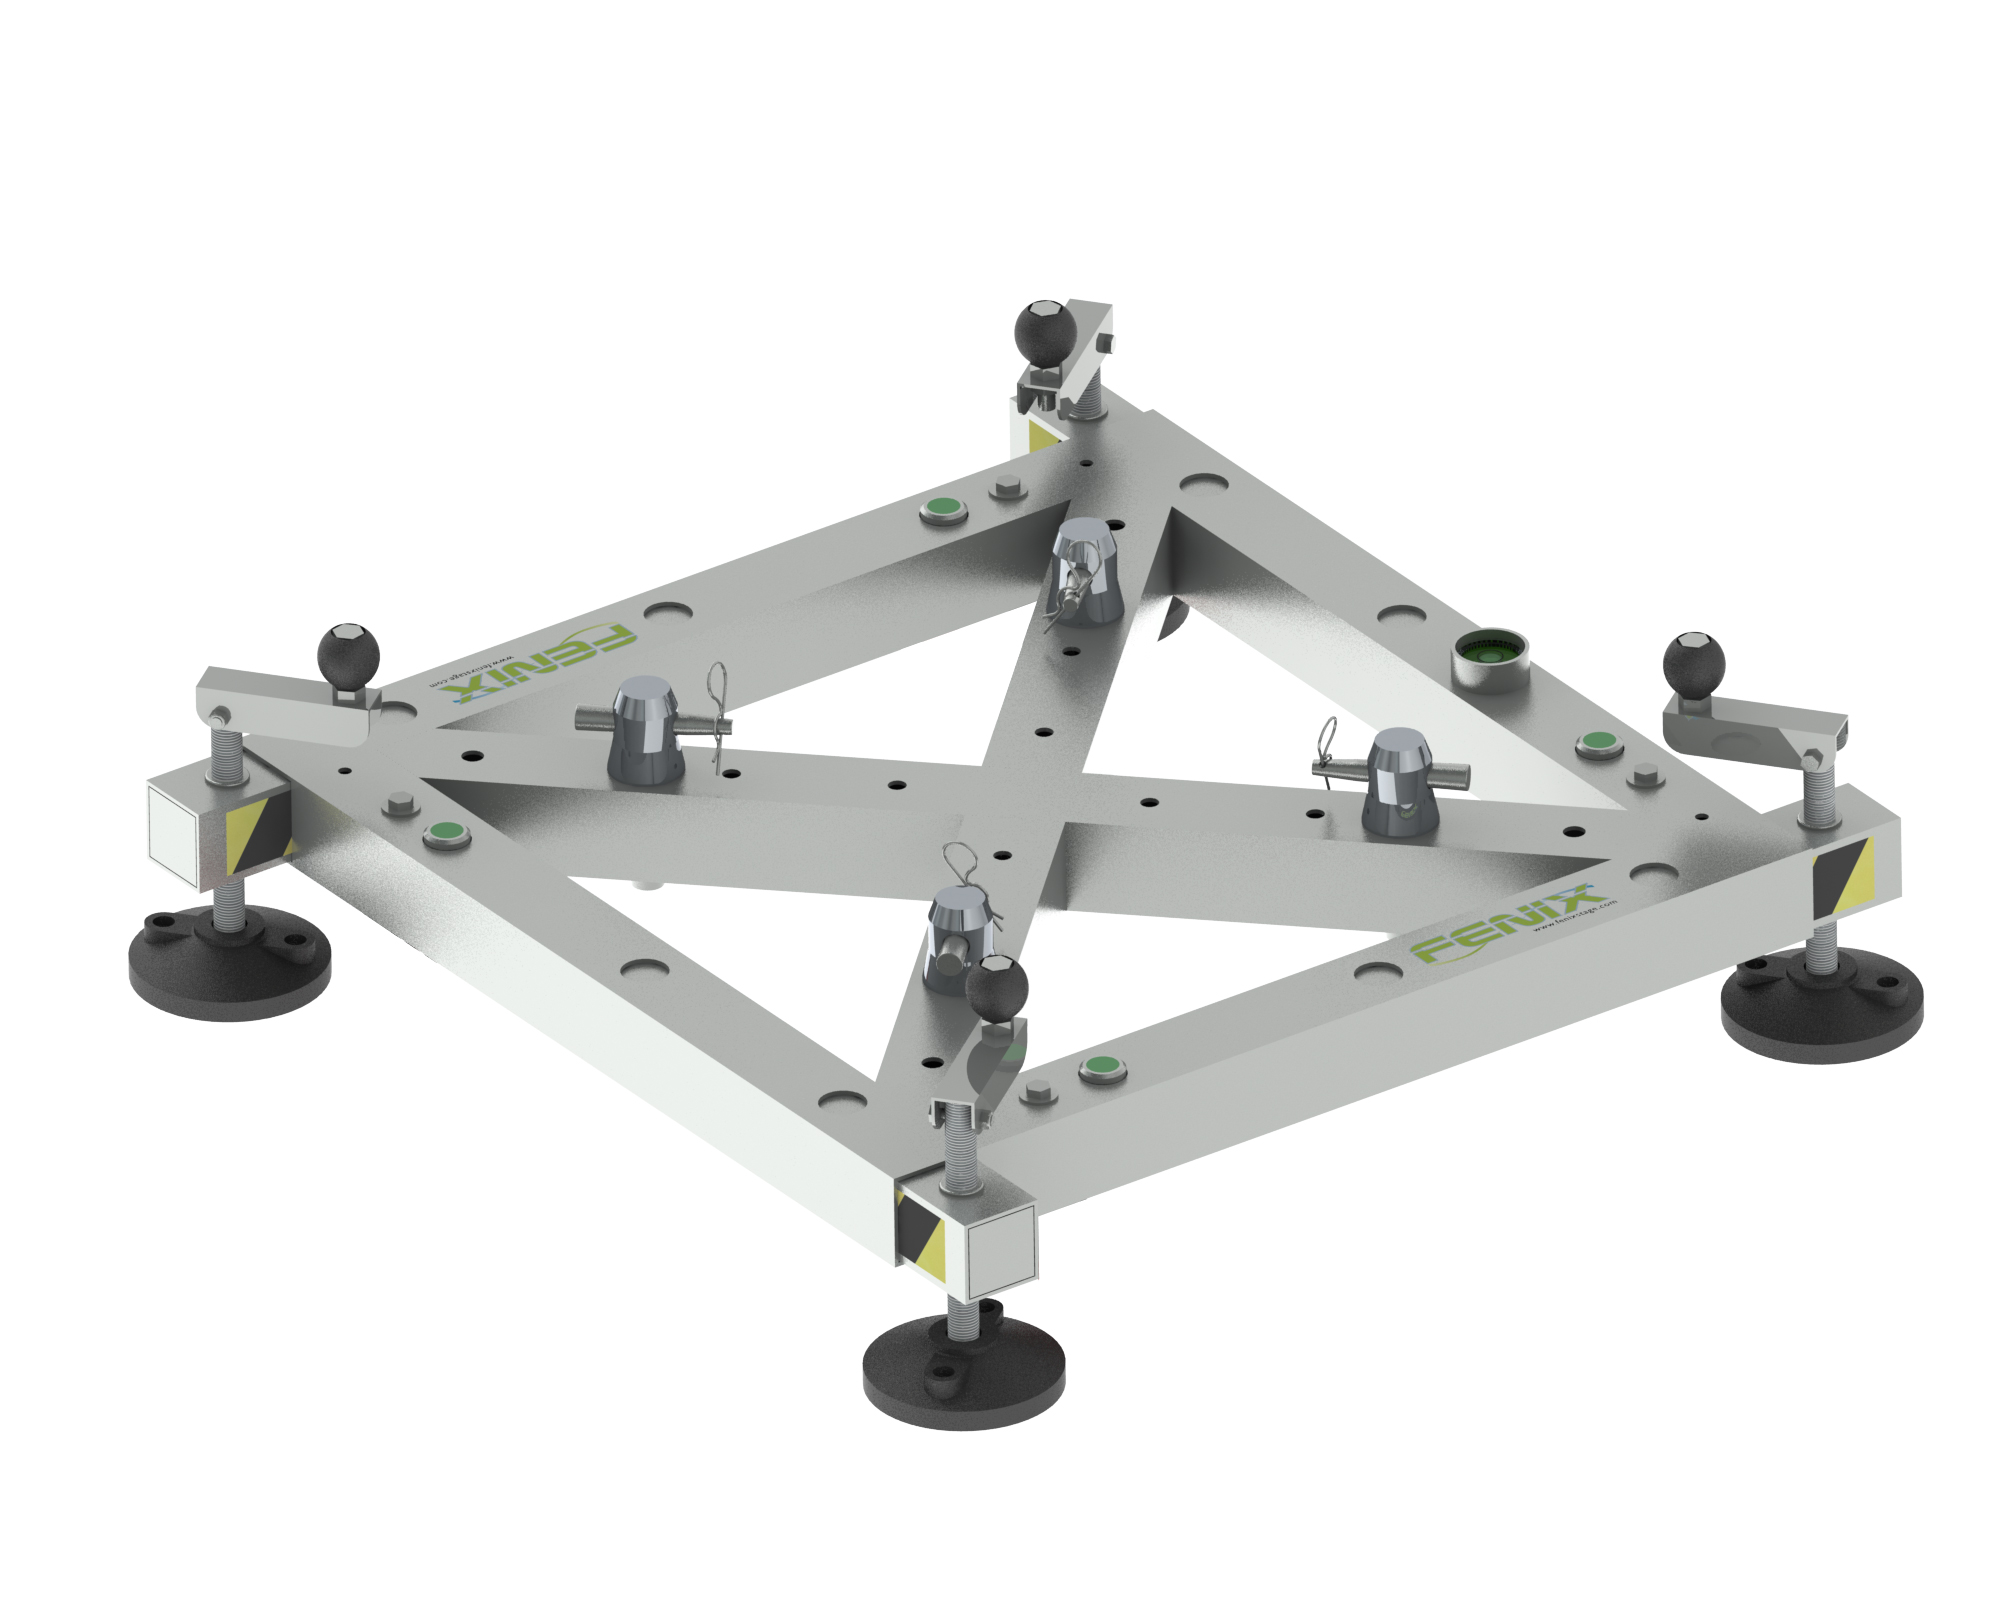 Stabilizer base with extendable legs without wheels